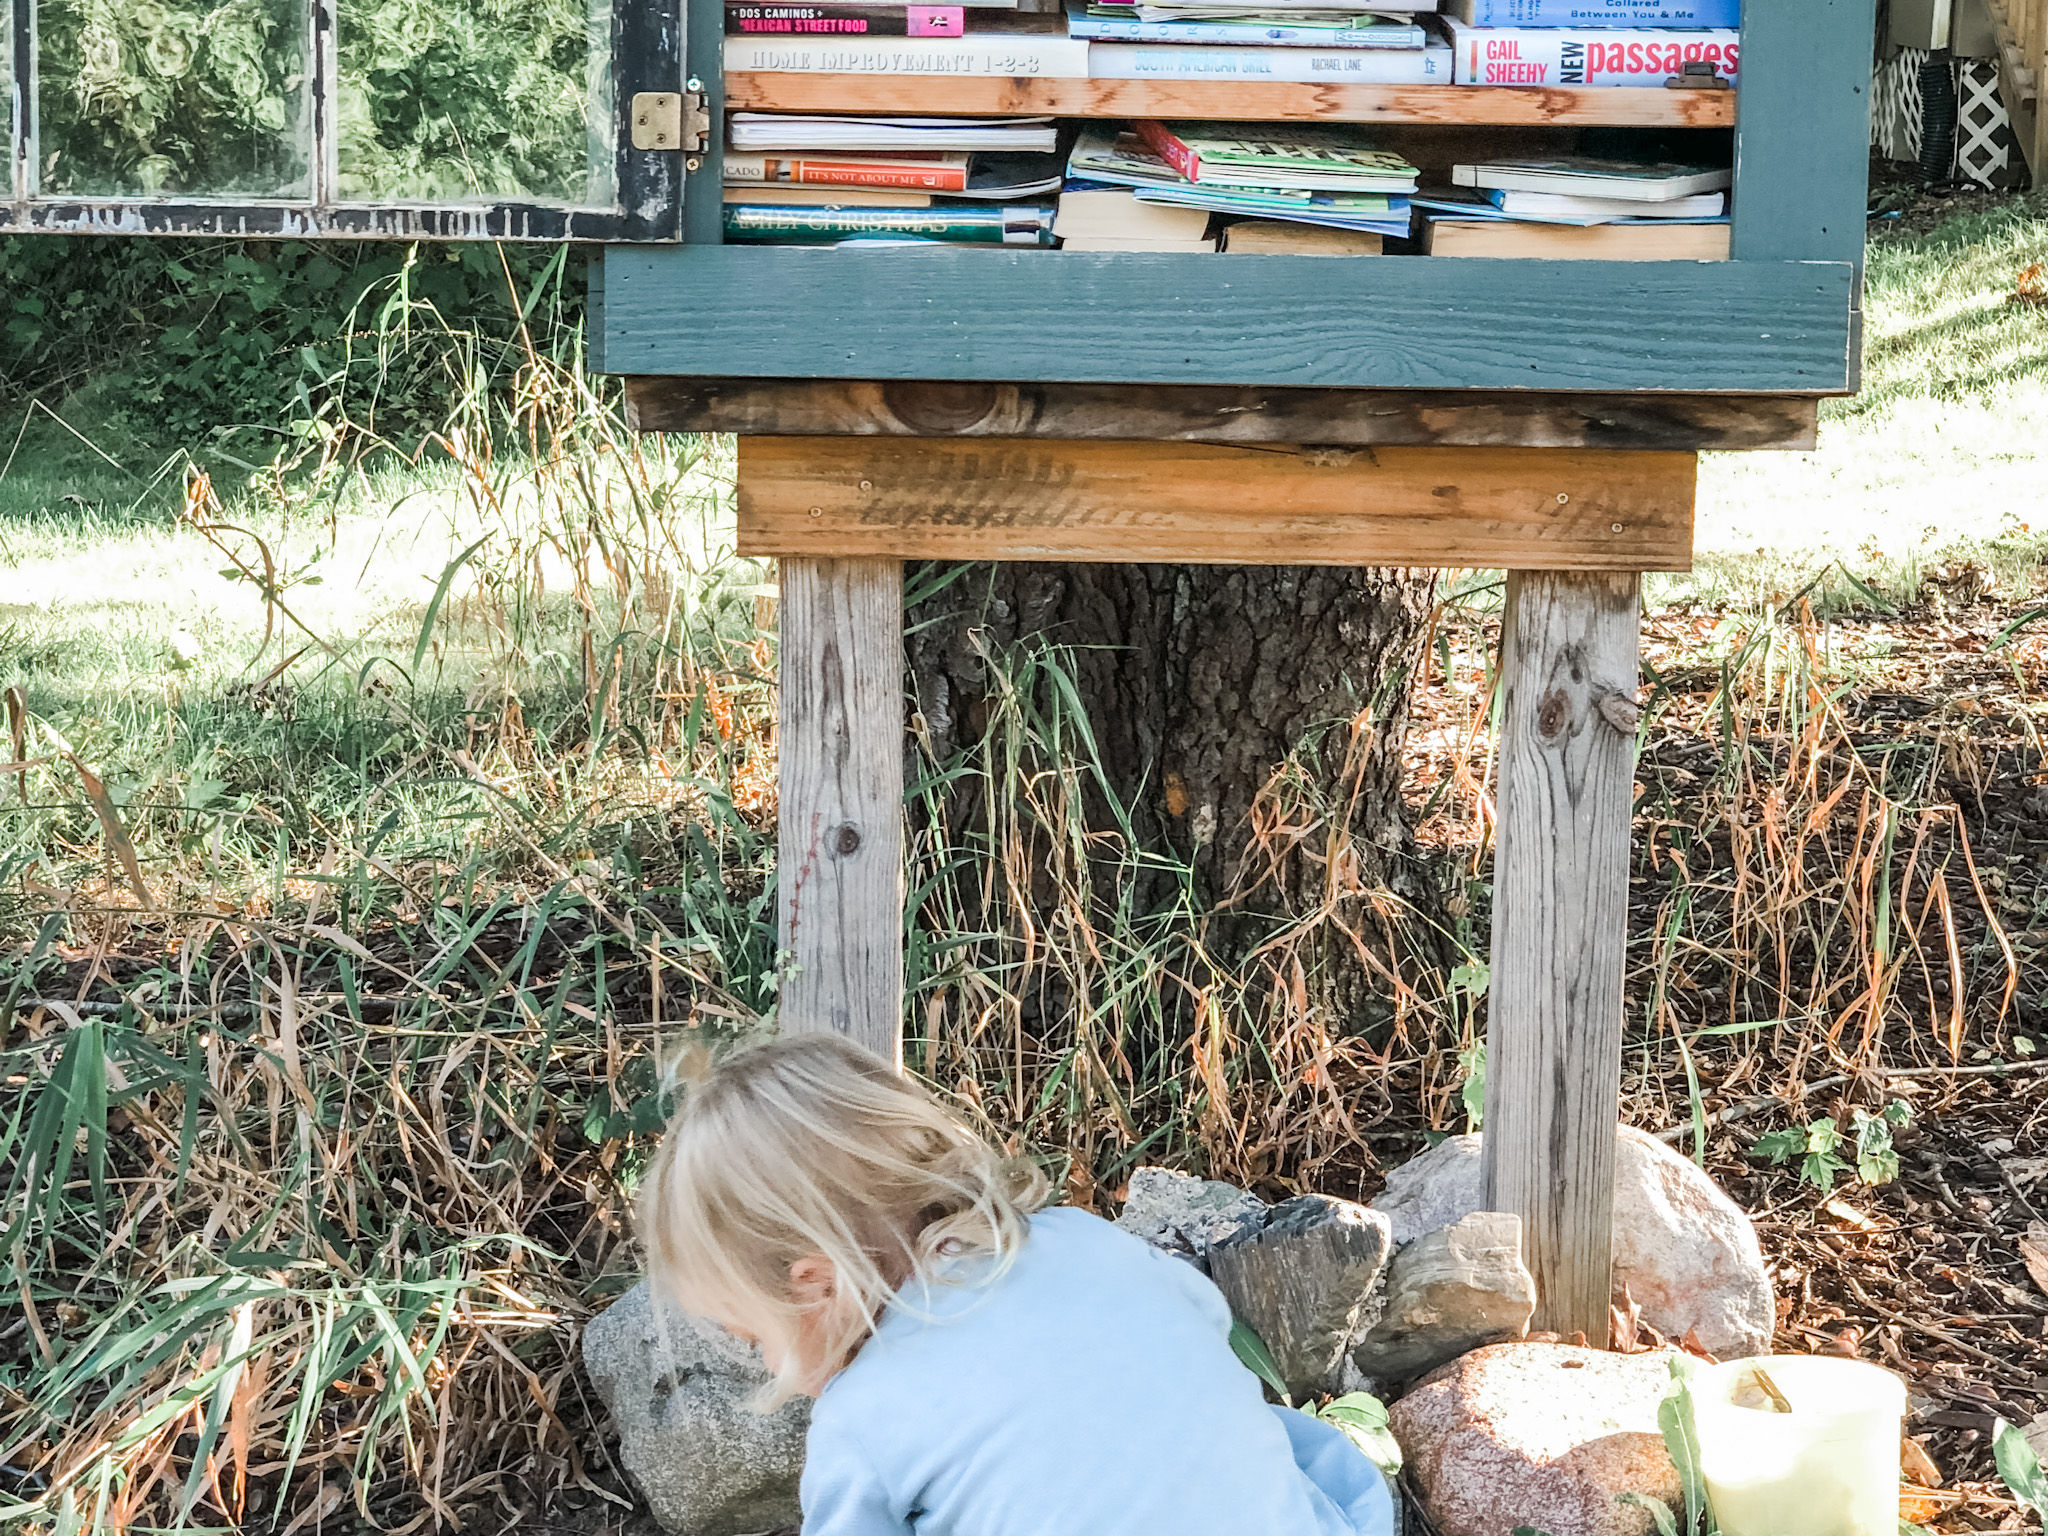 A child enjoying a local free little library as a summer activity.